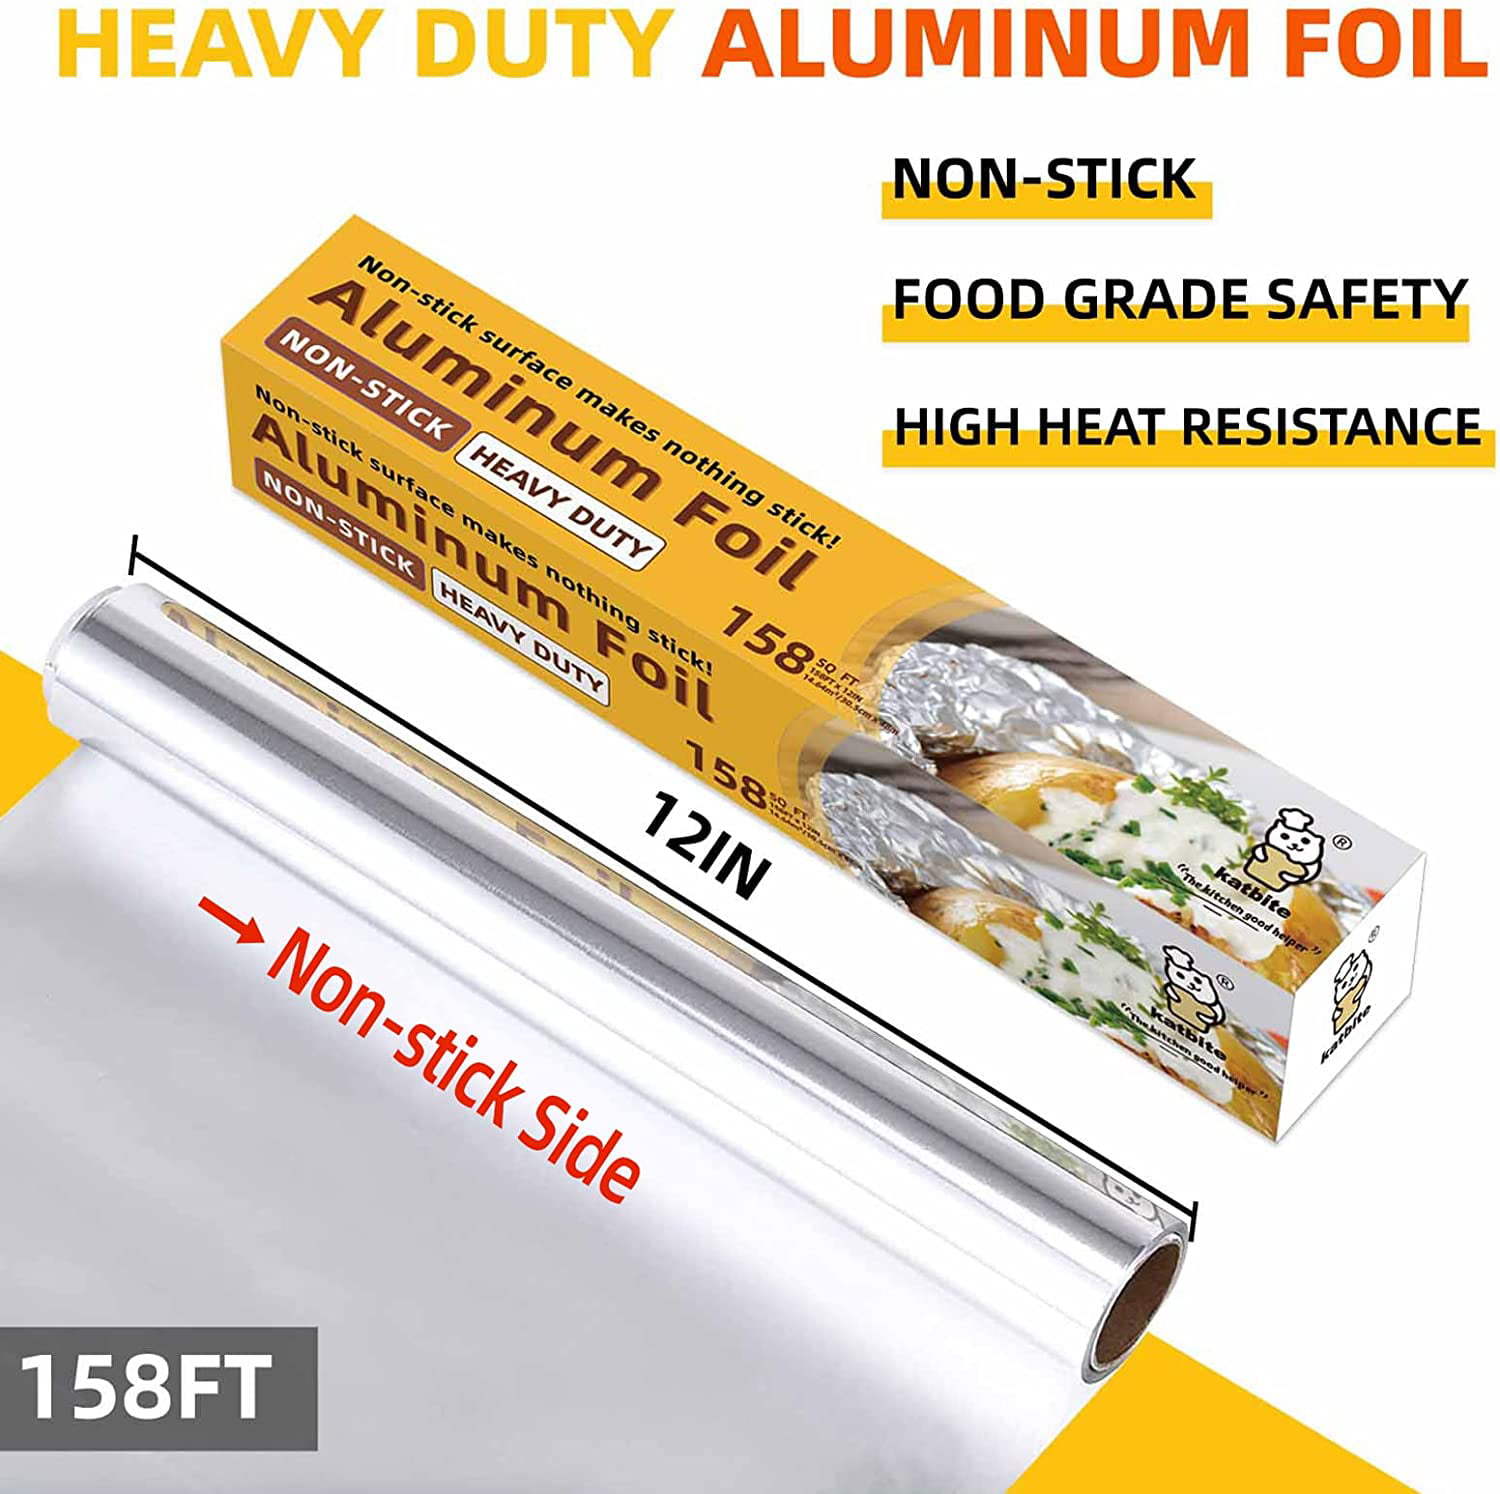 Katbite 2Pack 98 Sq Ft Non Stick Aluminum Foil Roll, 12 Inch Embossed  Grilling Nonstick Foil Wrap for Cooking, Roasting, BBQ, Baking, Catering  with